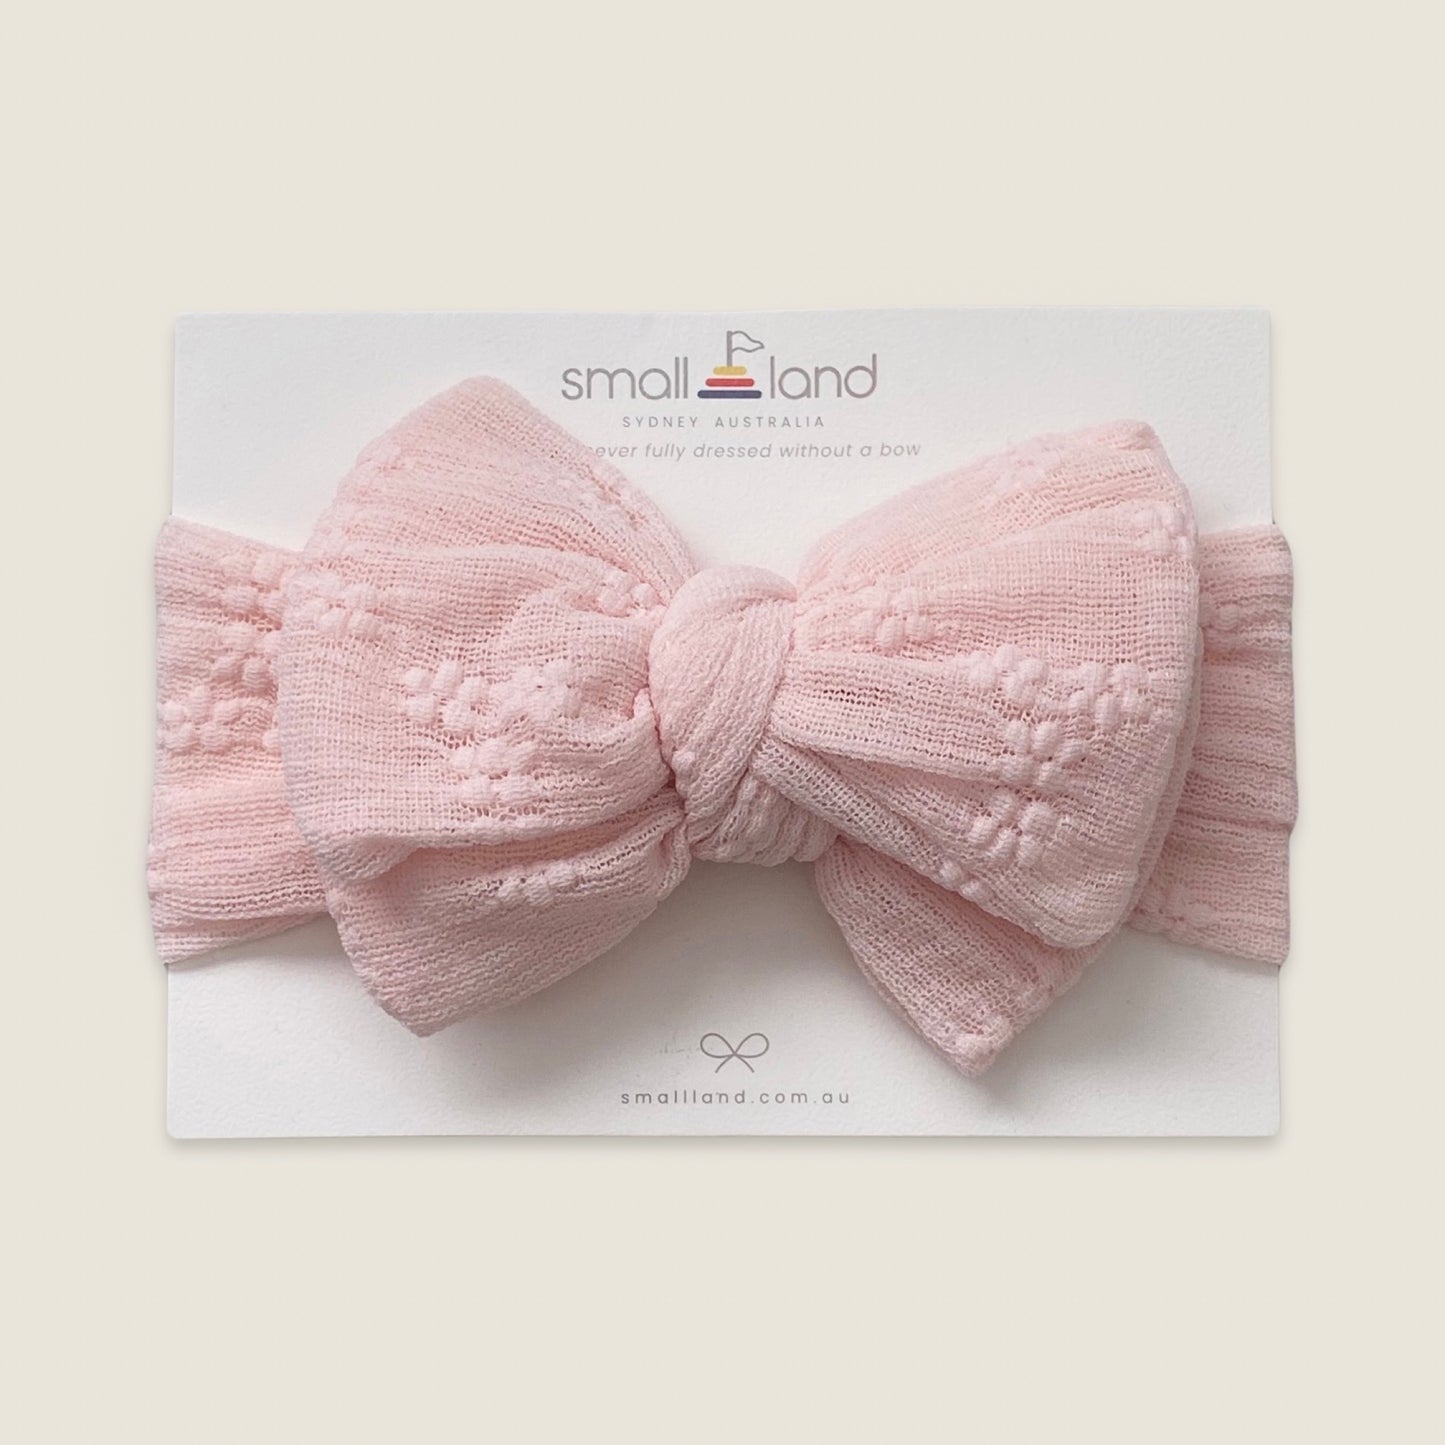 Embroidered Lace Bow Headband